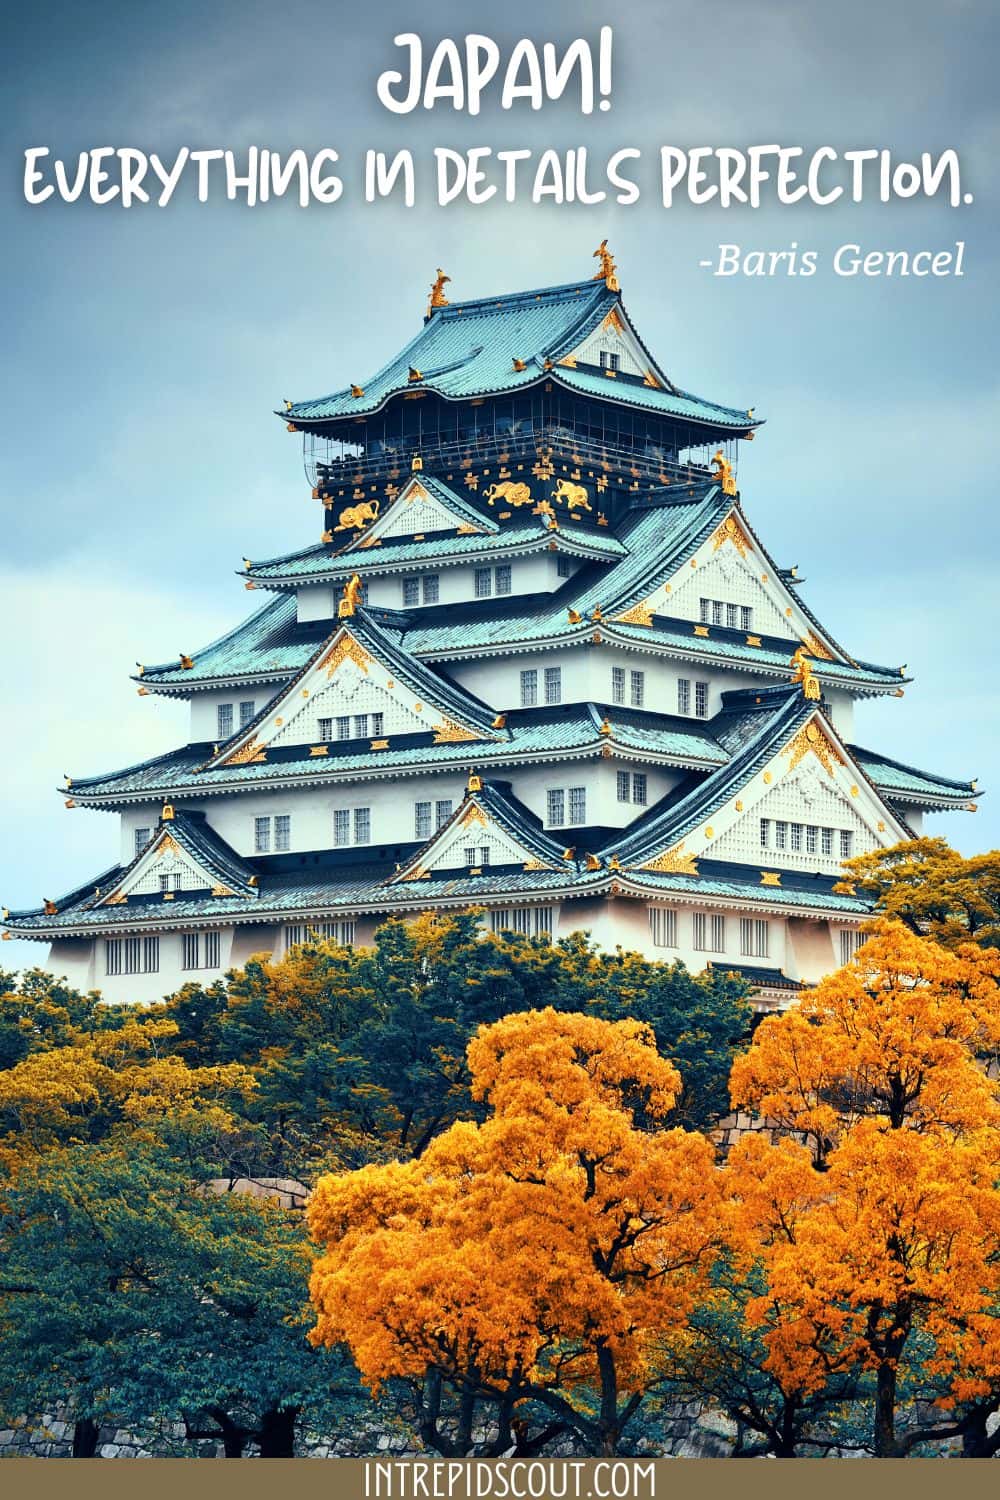 Quotes About Japan